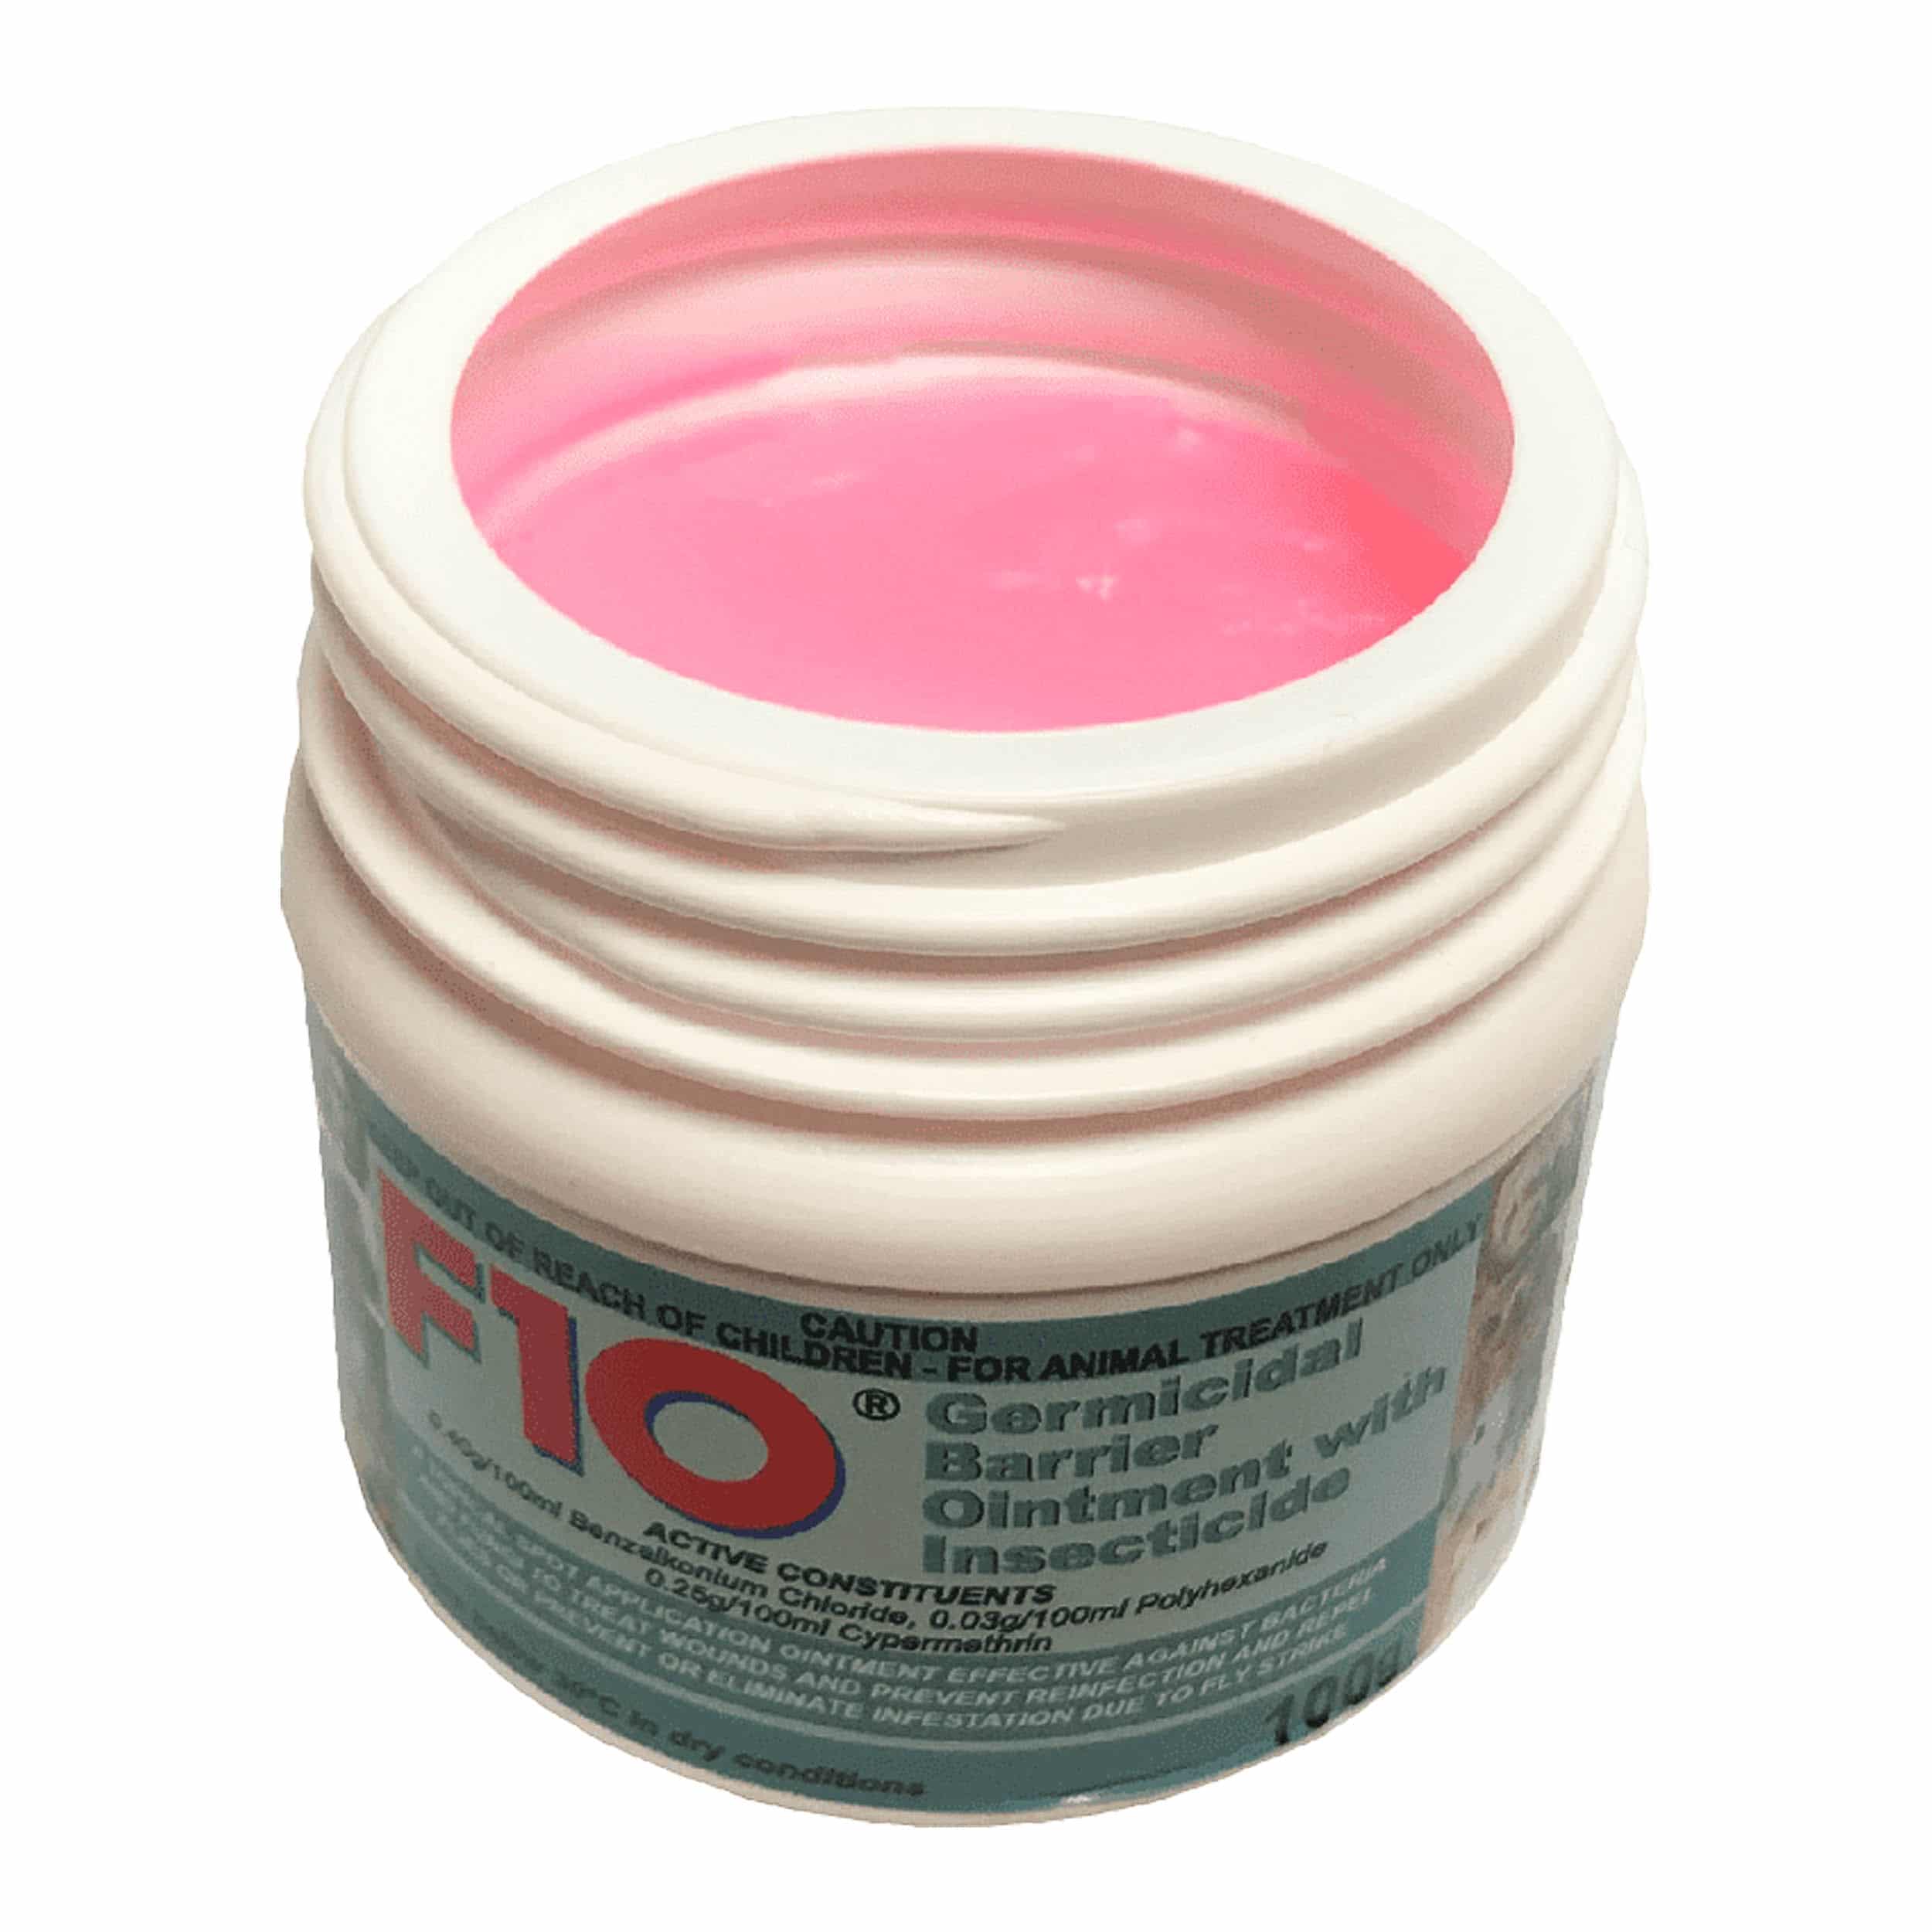 F10-Germicidal-Barrier-Ointment-With-Insecticide